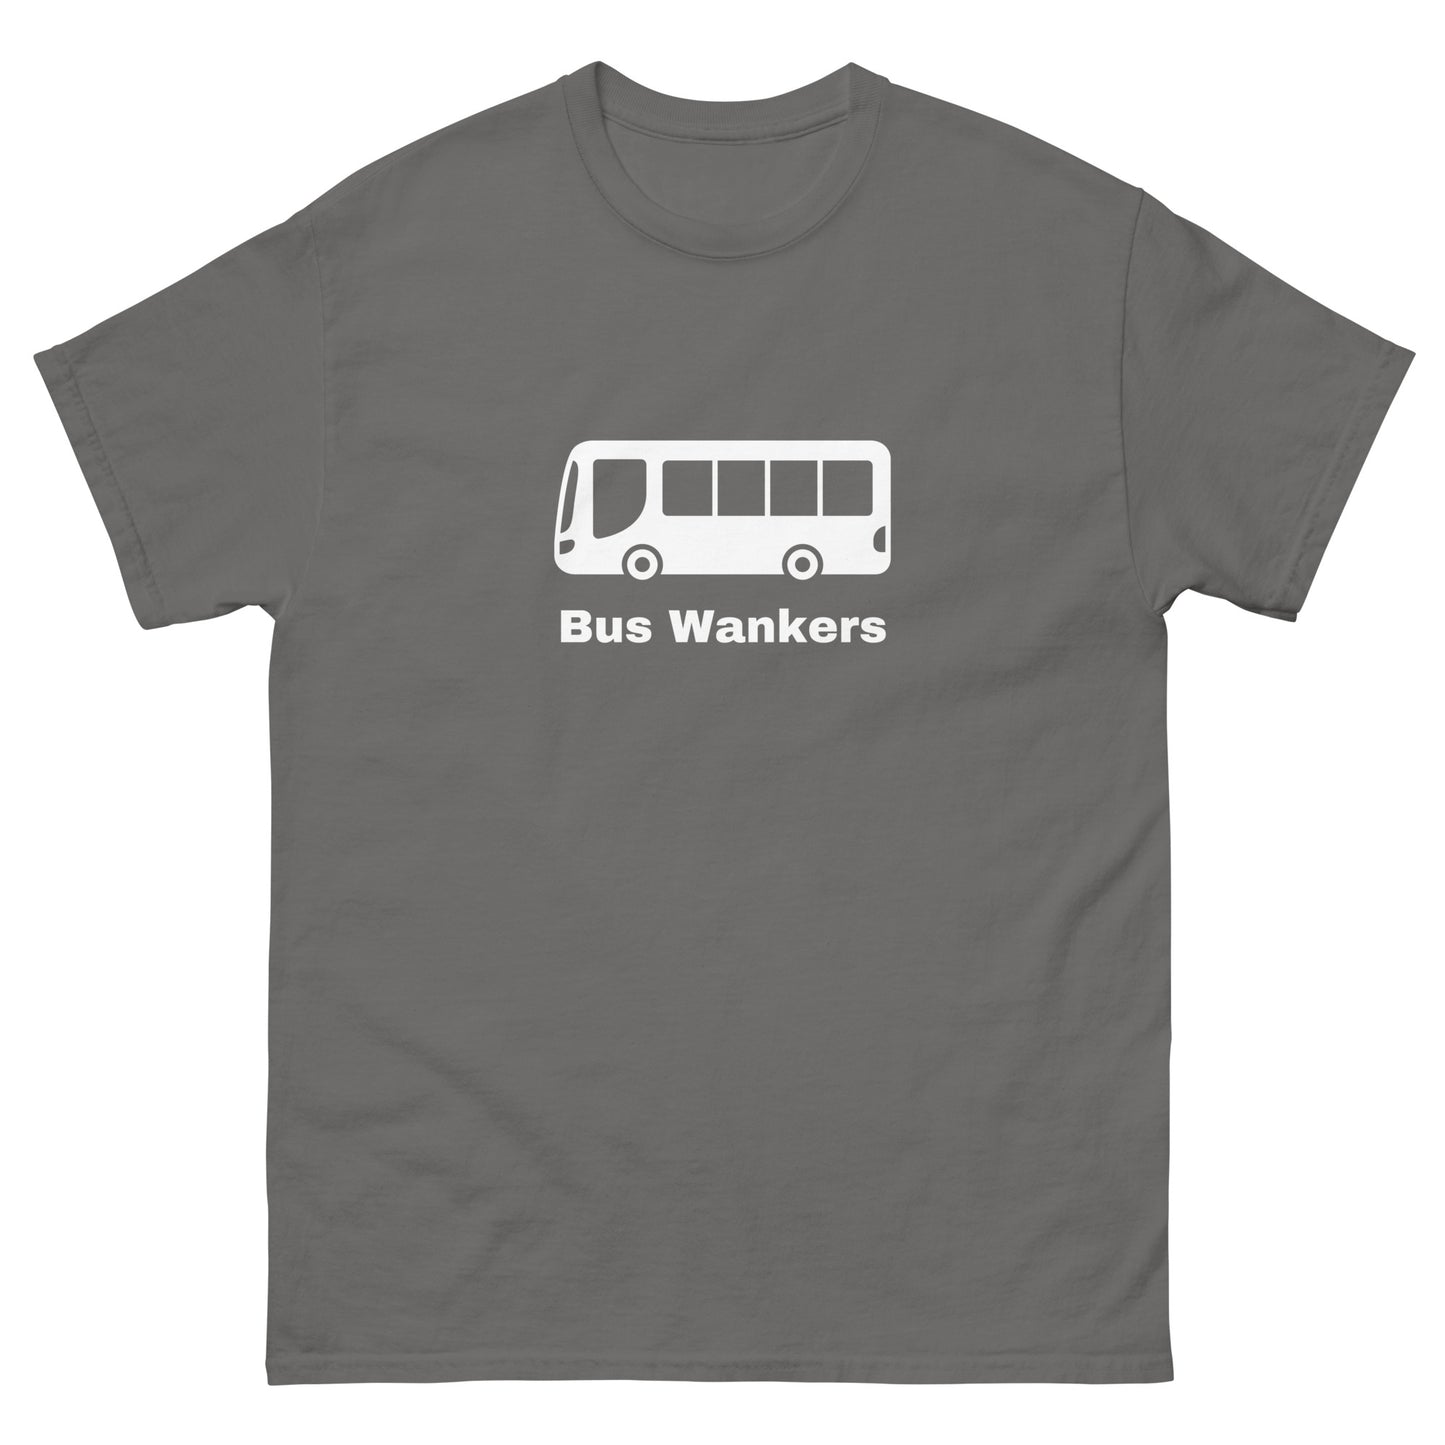 Bus W*nkers T-Shirt